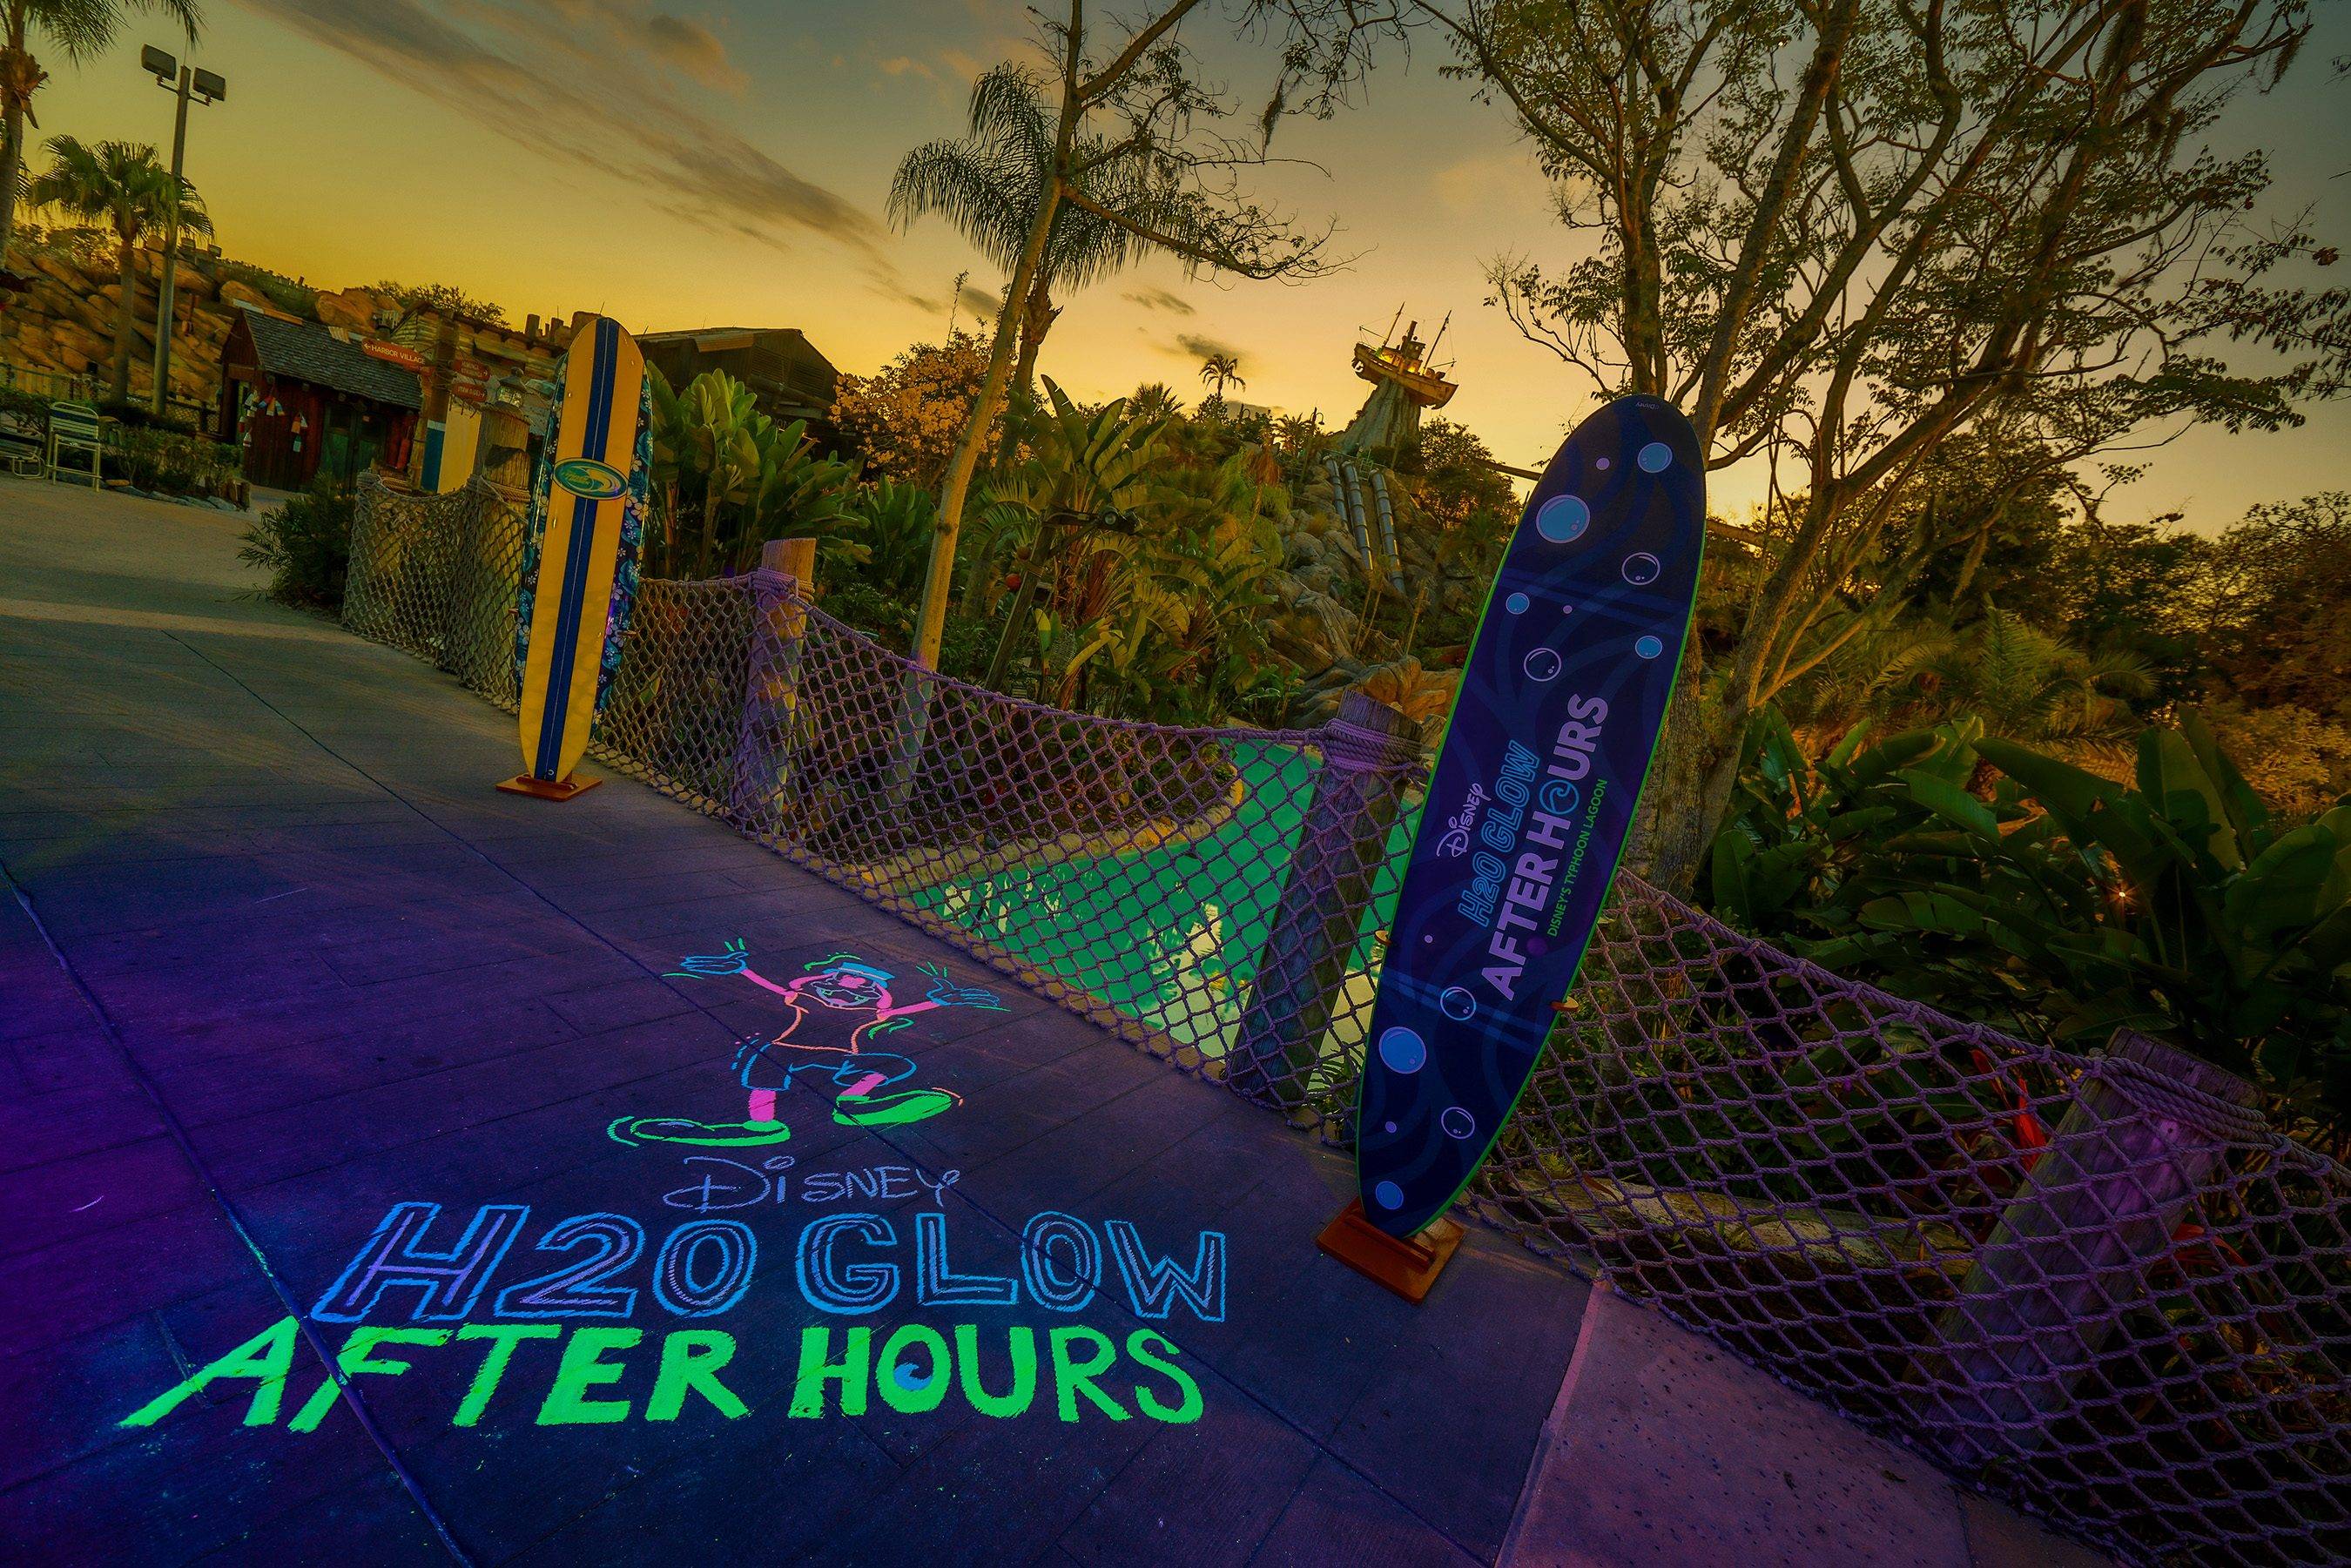 Disney H2O Glow After Hours returns to Disney's Typhoon Lagoon in May 2024